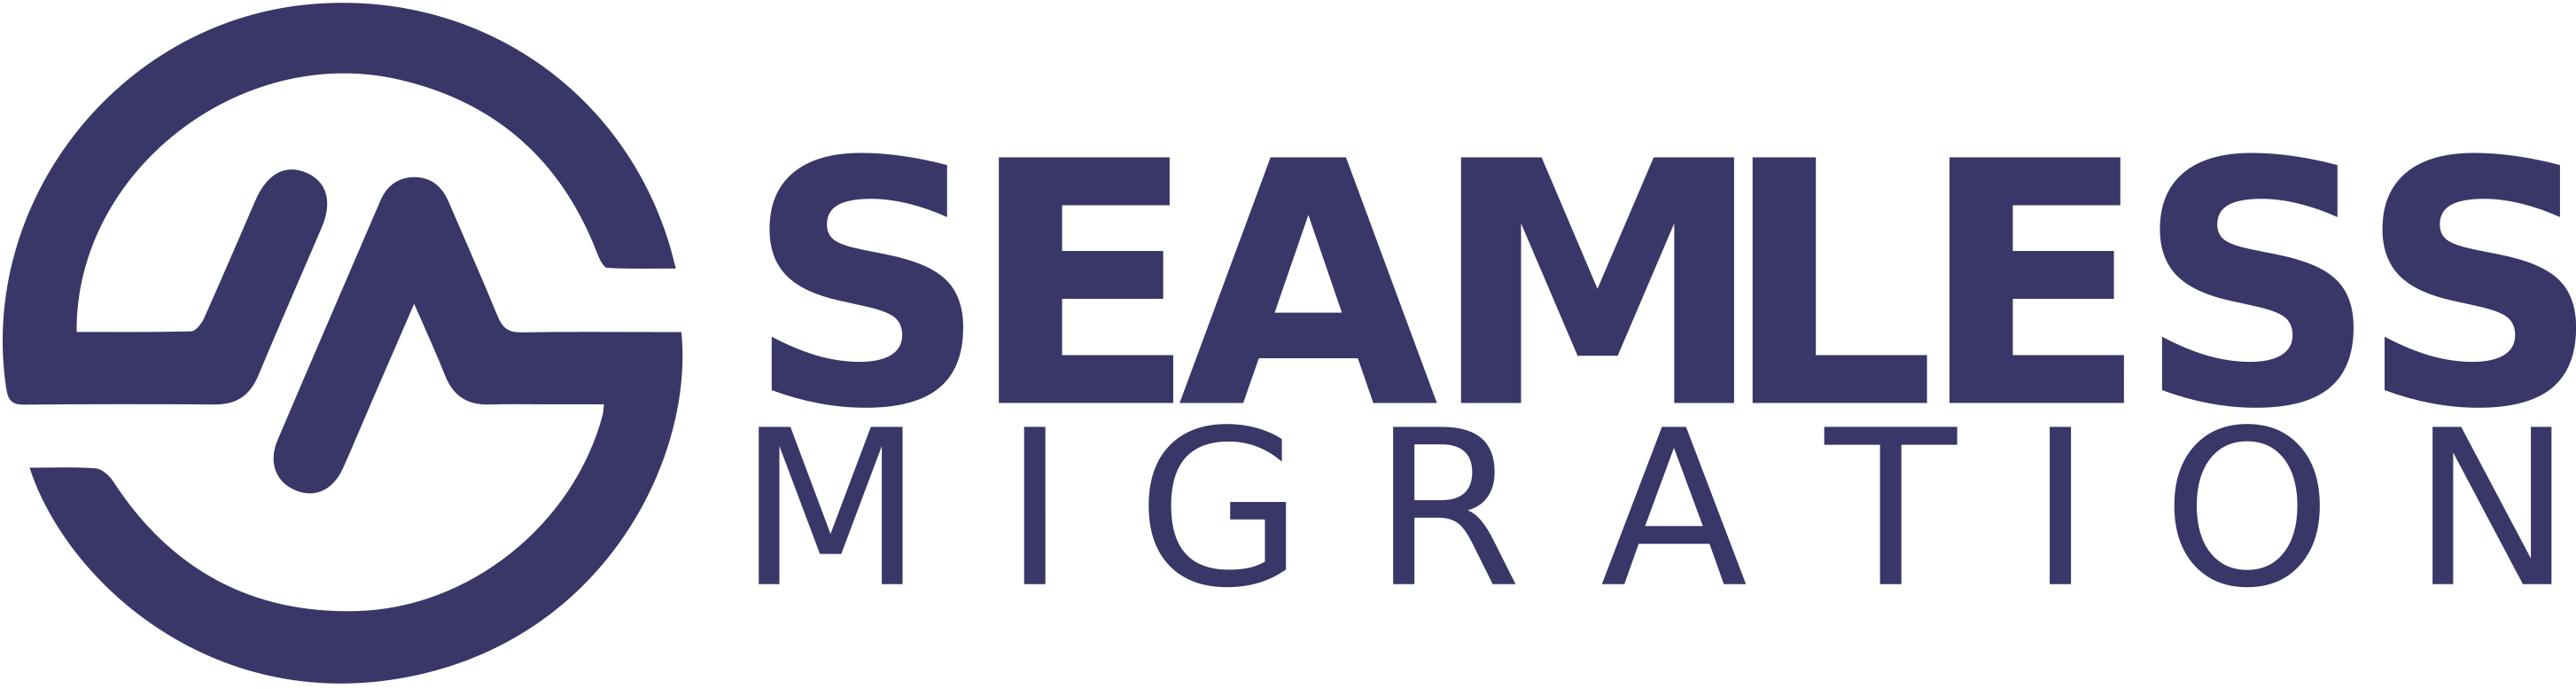 Careers at Seamless Migration